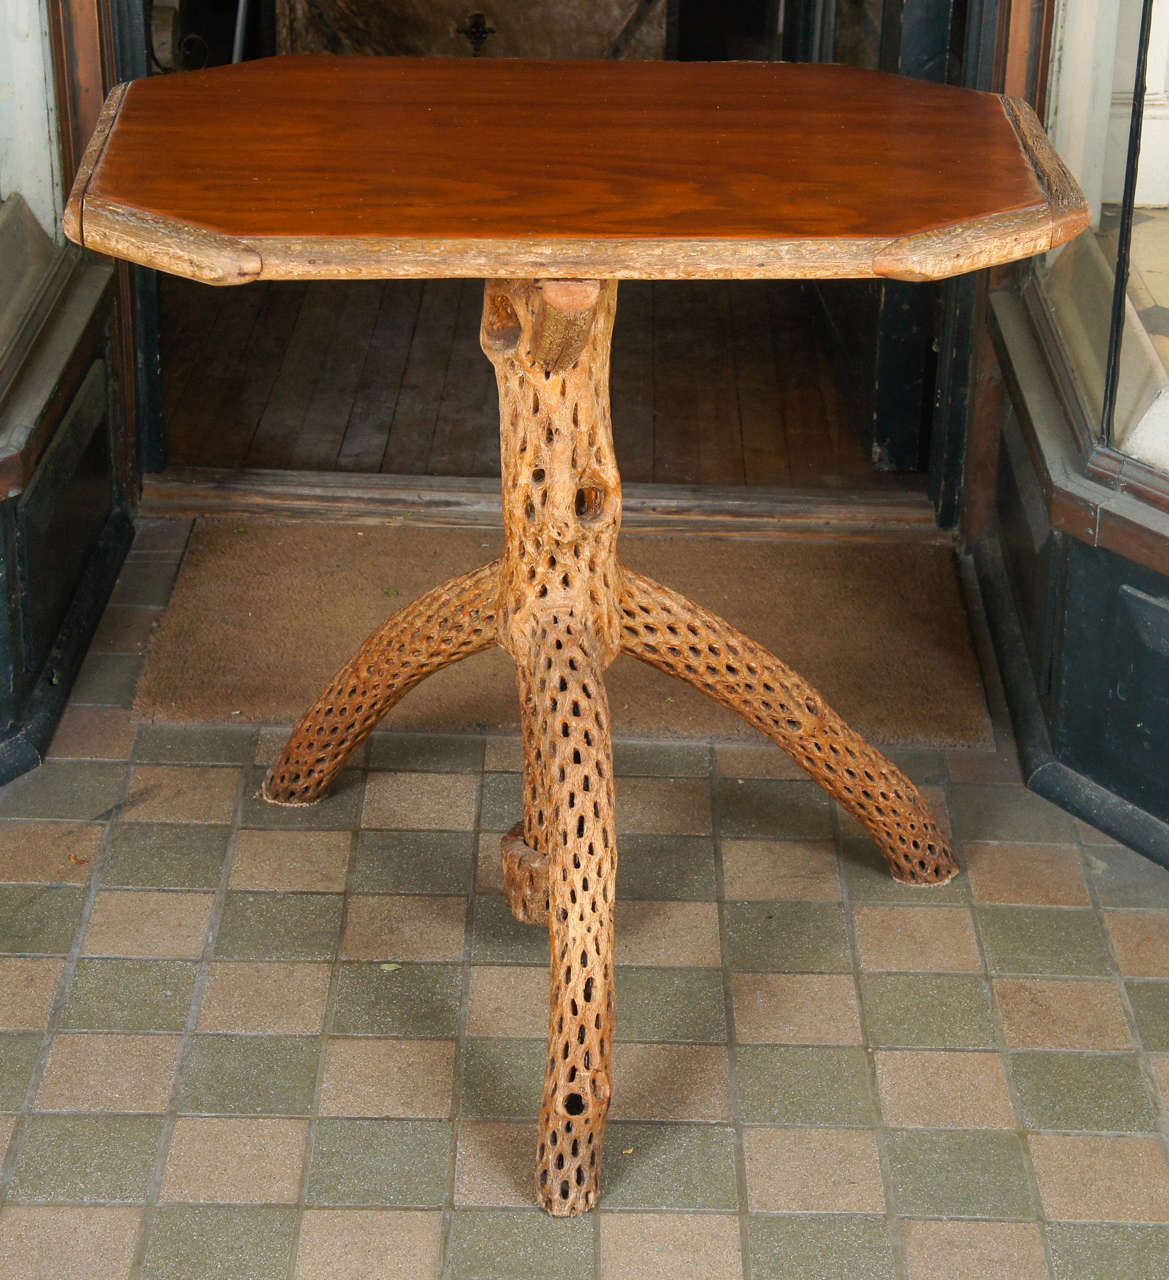 This interesting and unusual table made in the southwest circa 1930 is constructed of Saguaro wood, a kind of slow-growing dense cactus with a distinctive outer casing that is used for decorative display. The form is an extension of the mission